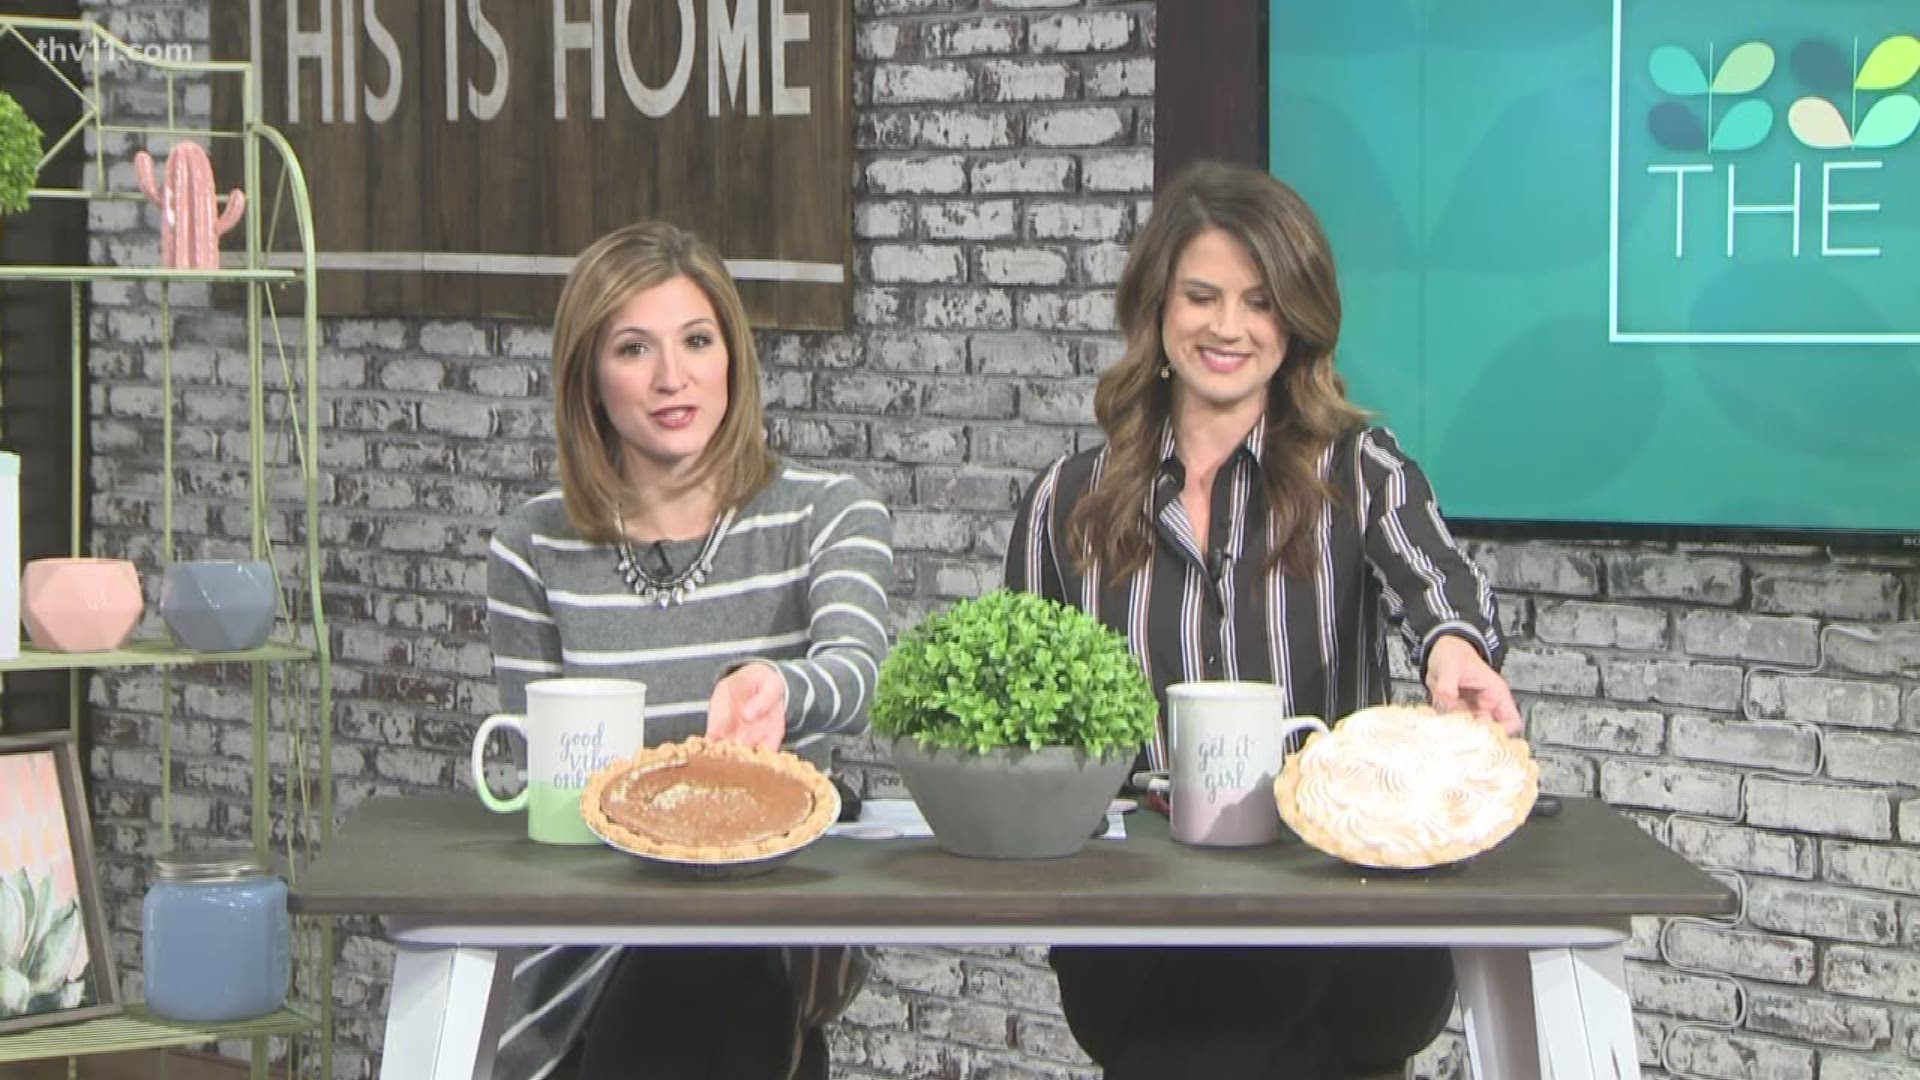 Honey Pies Gourmet Bakery & Cafe is celebrating National Pie Day in style!